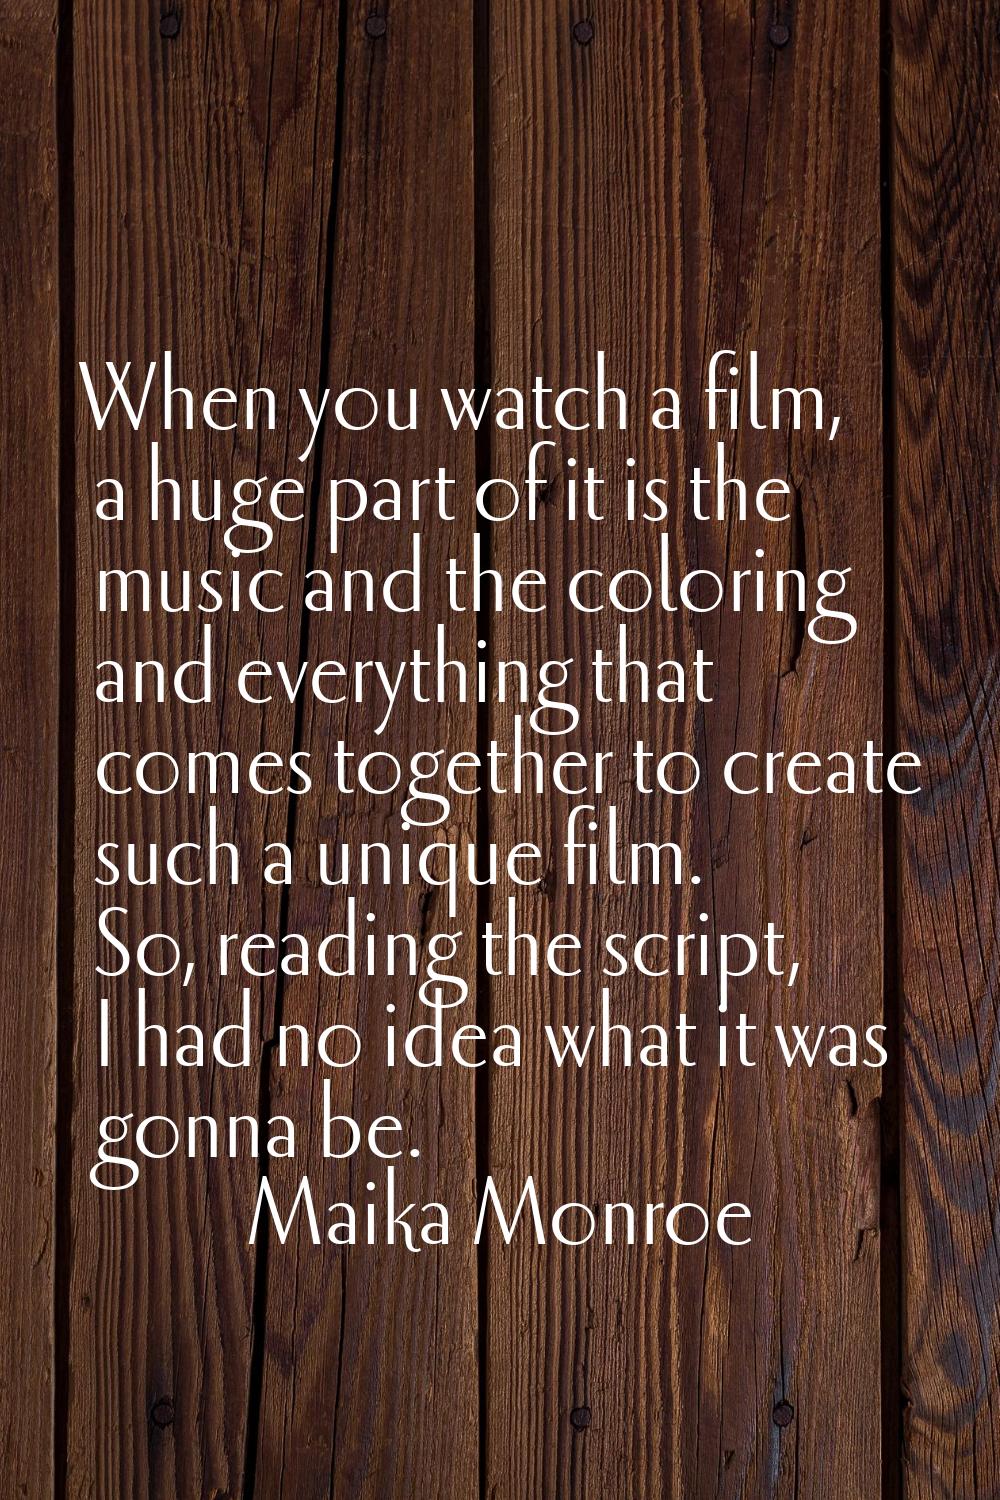 When you watch a film, a huge part of it is the music and the coloring and everything that comes to